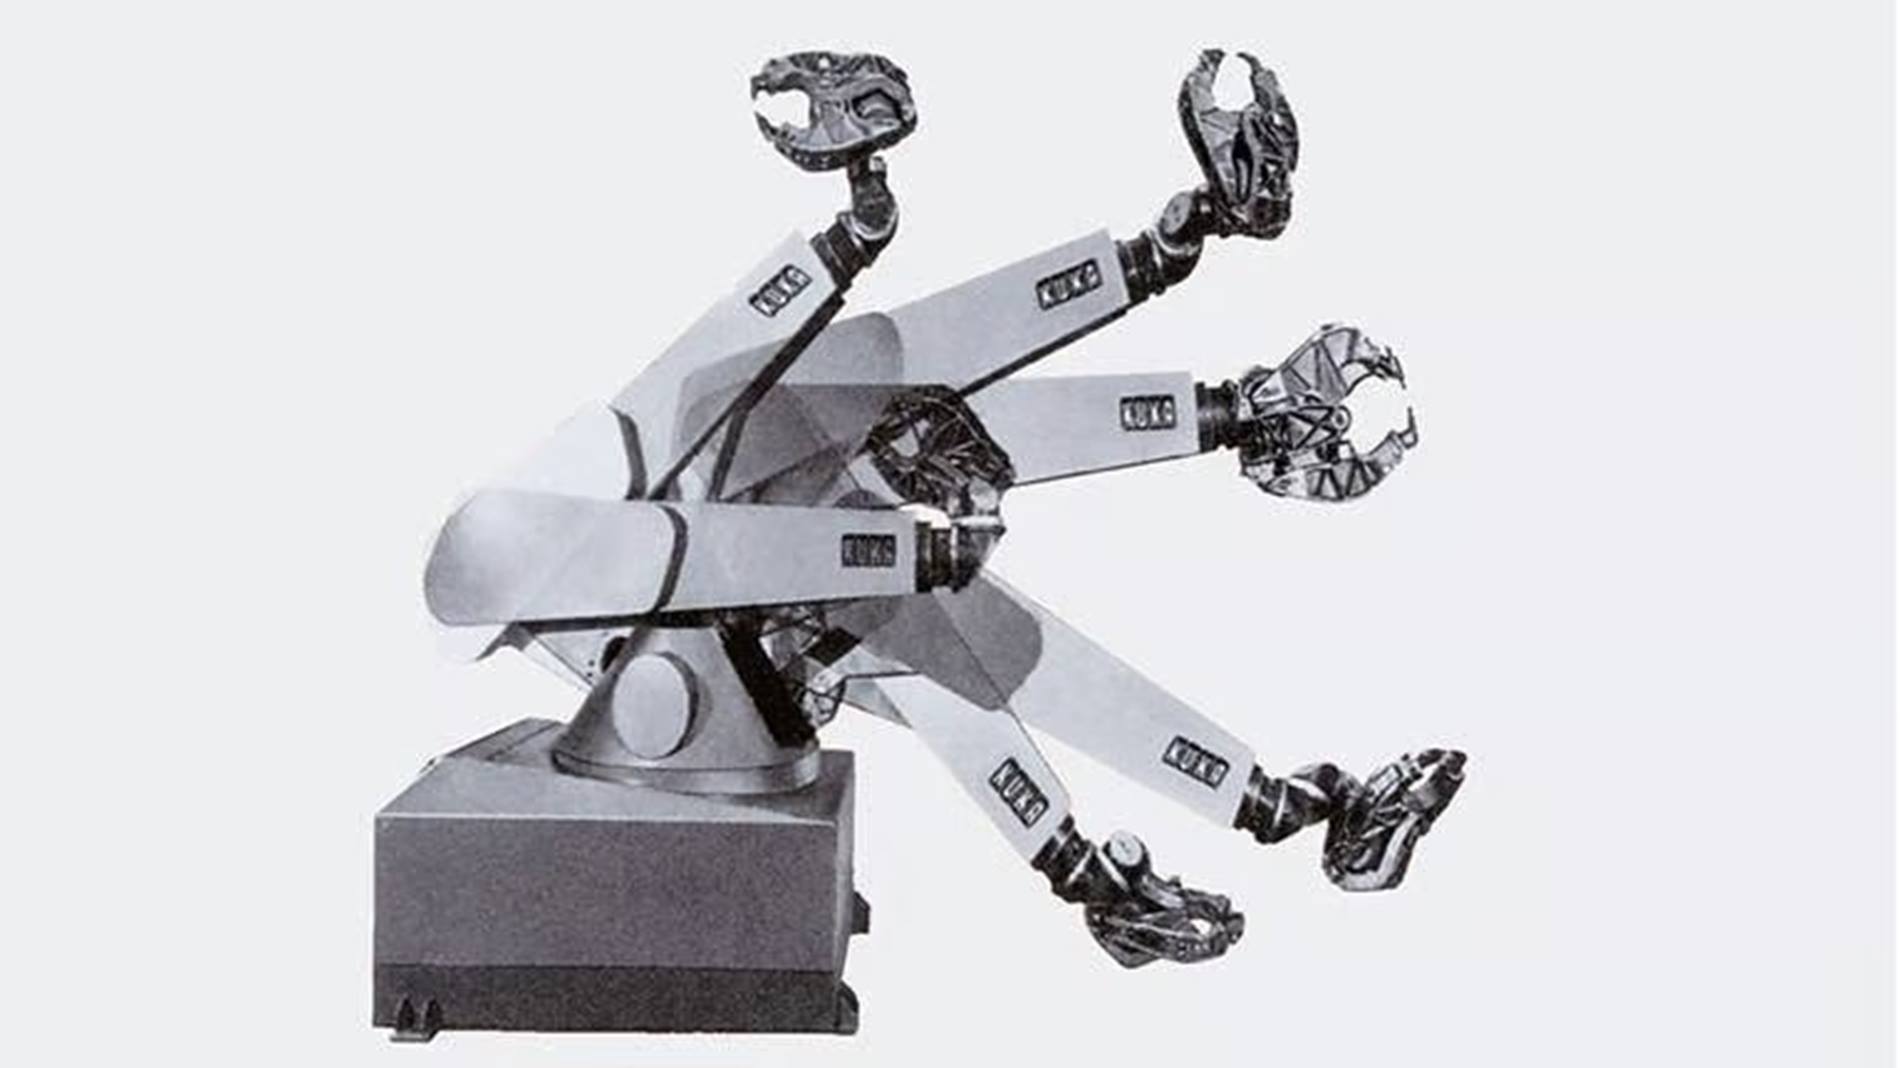 KUKA Famulus, the first KUKA robot with which the company made history as a robotics pioneer in 1973. 